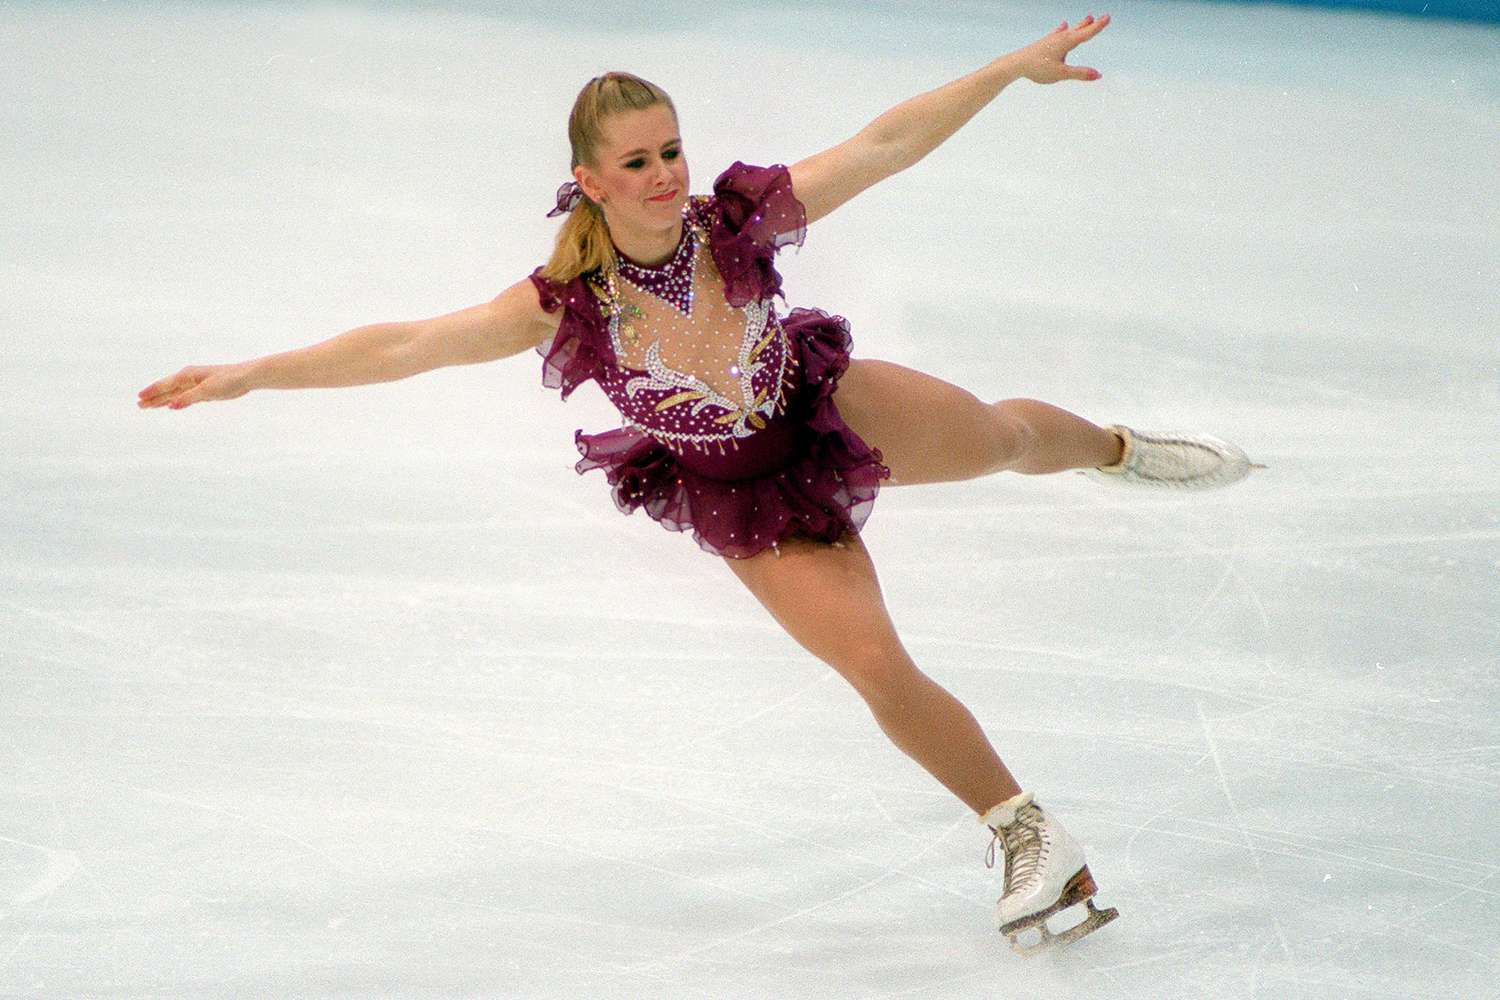 Sport. 1994 Winter Olympic Games. Lillehammer, Norway. Ice Skating. Ladies Figure Skating Singles. Tonya Harding, USA, who finished 8th after being thought to be a strong medal candidate. Tony Harding had been implicated in an earlier plot to injure her g